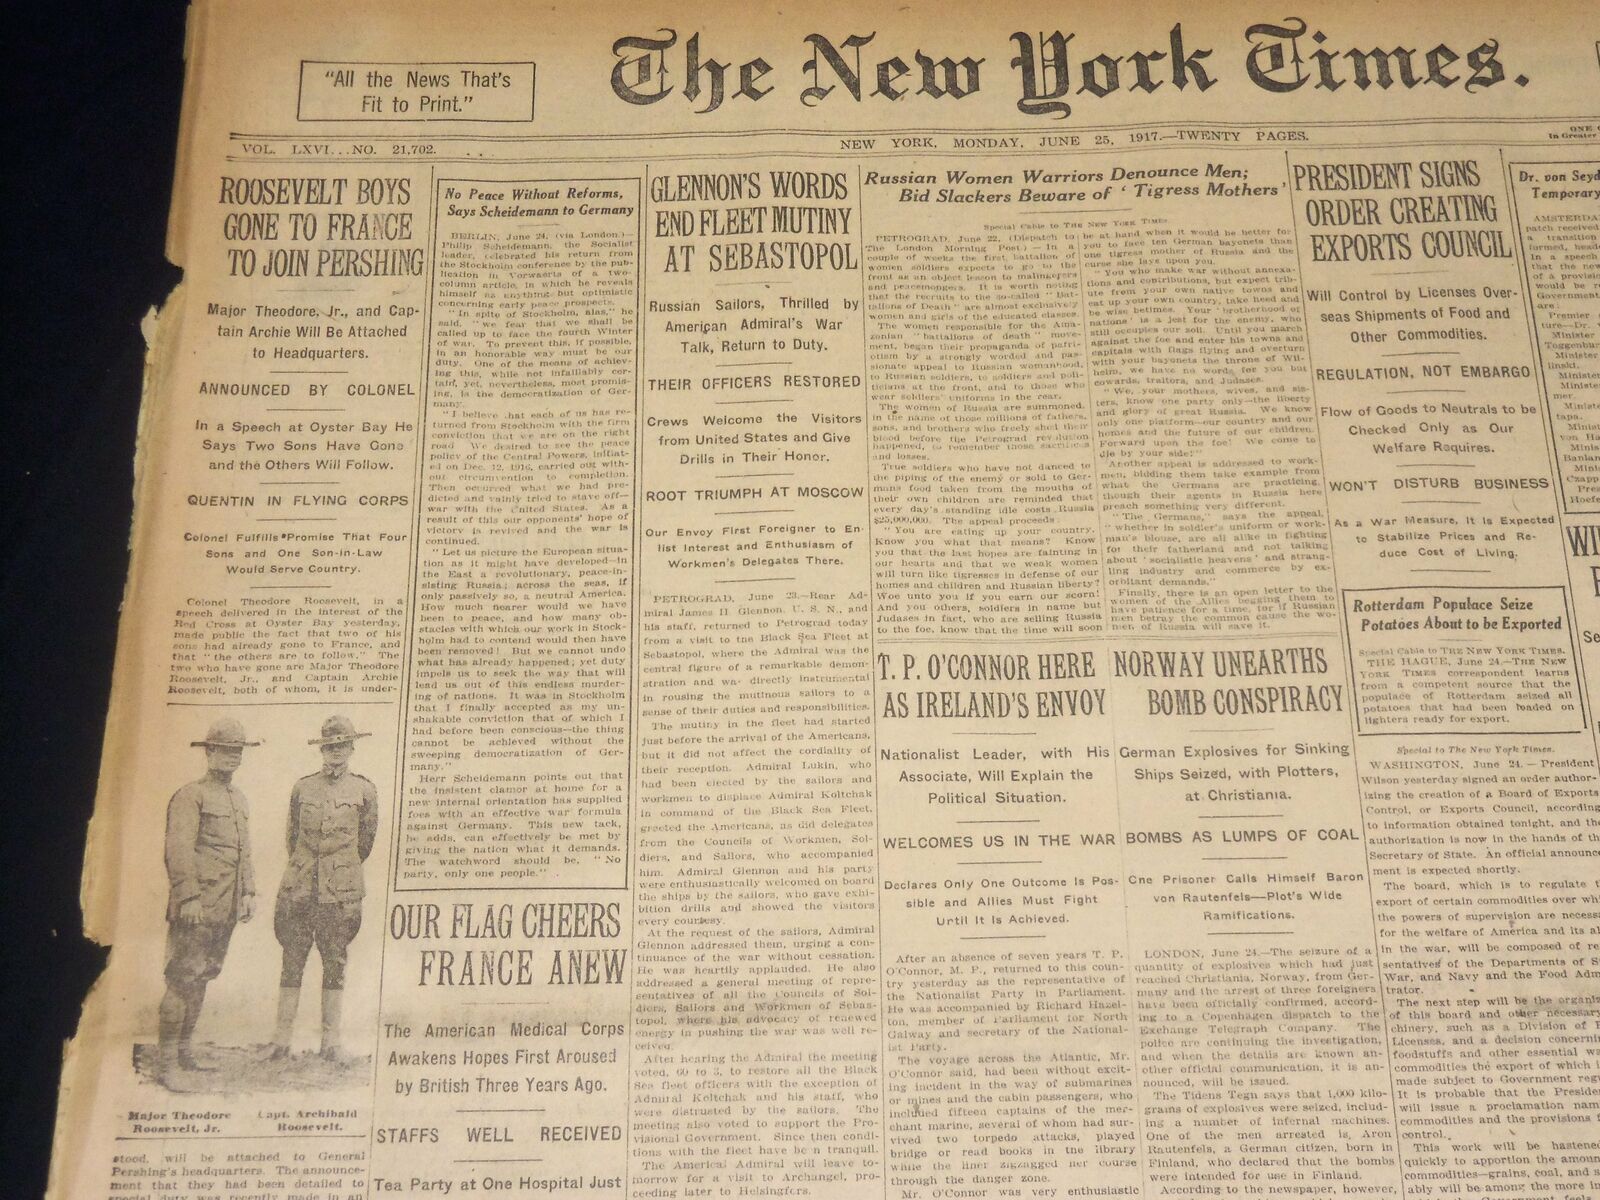 1917 JUNE 25 NEW YORK TIMES NEWSPAPER- ROOSEVELT BOYS TO JOIN PERSHING - NT 7804